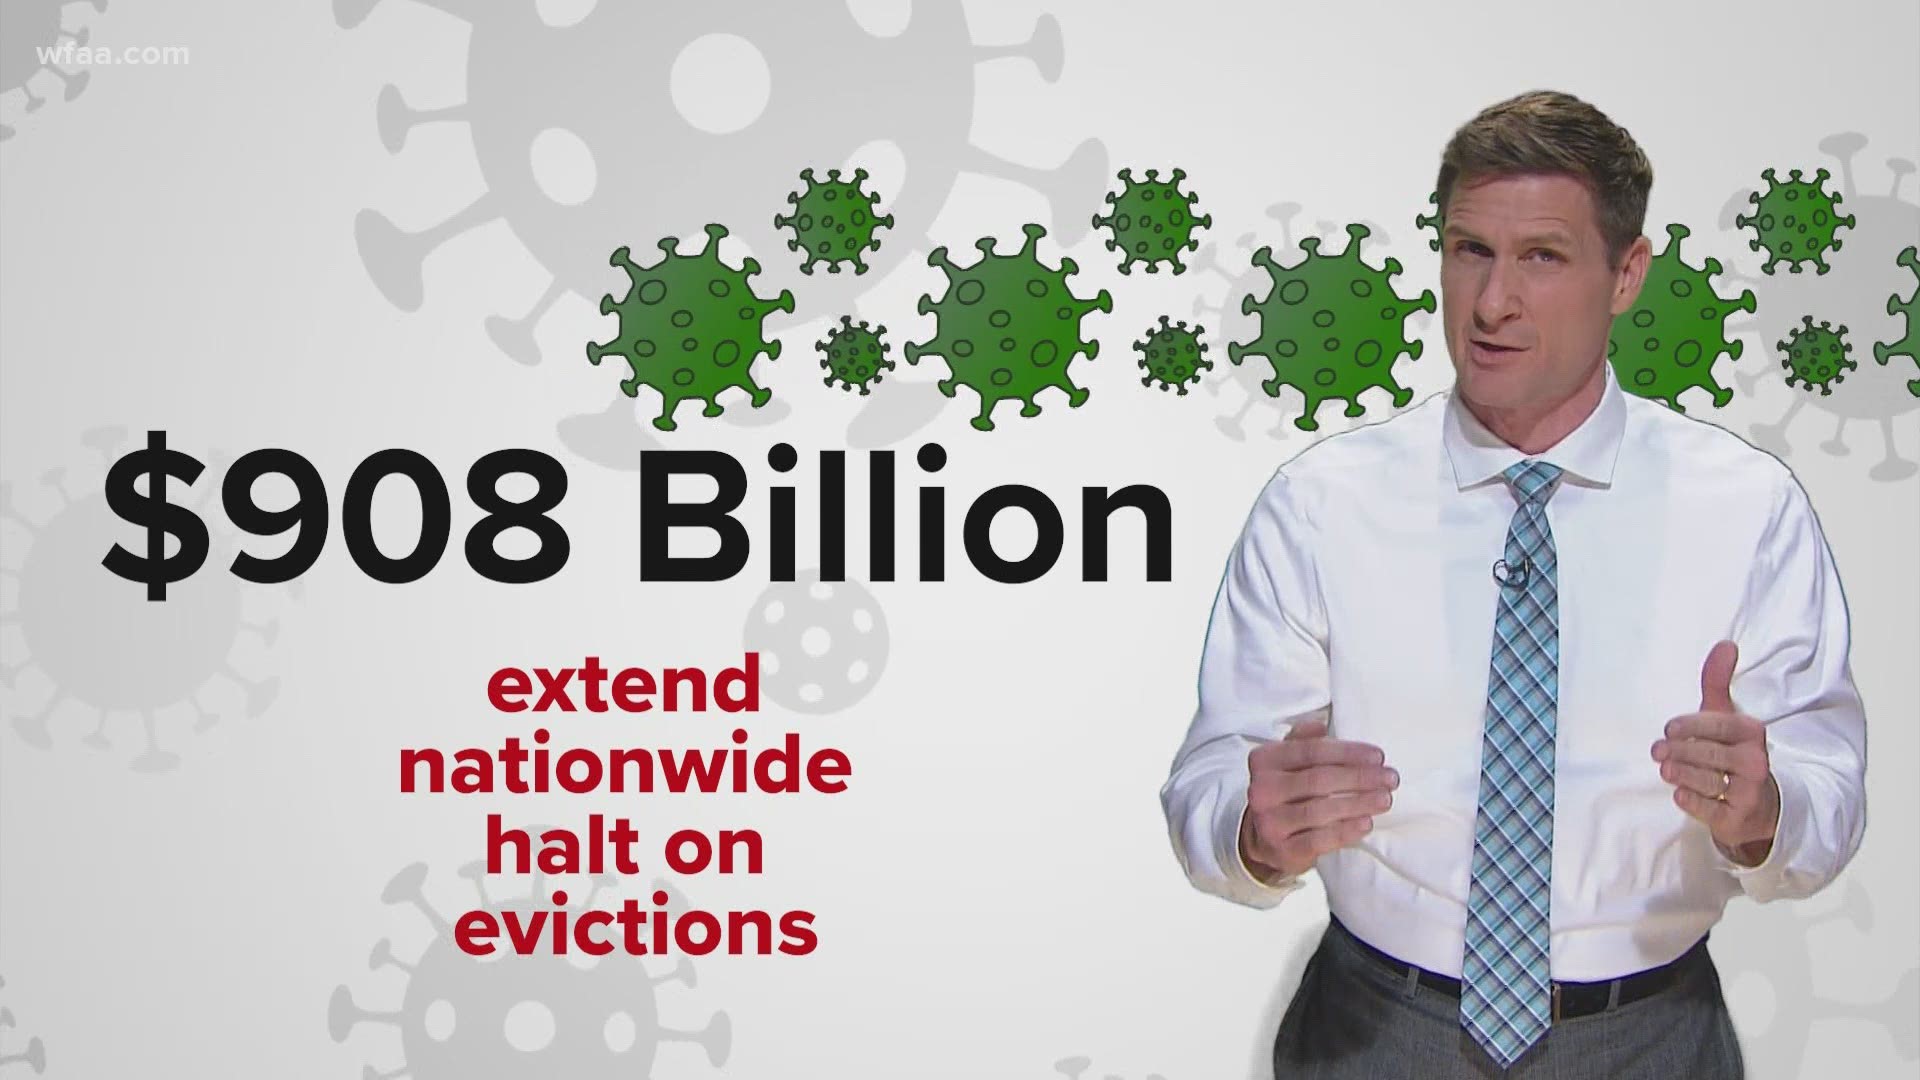 With a huge wave of evictions predicted in the coming weeks, millions of renters and landlords are watching as eviction protections and rent payment programs expire.